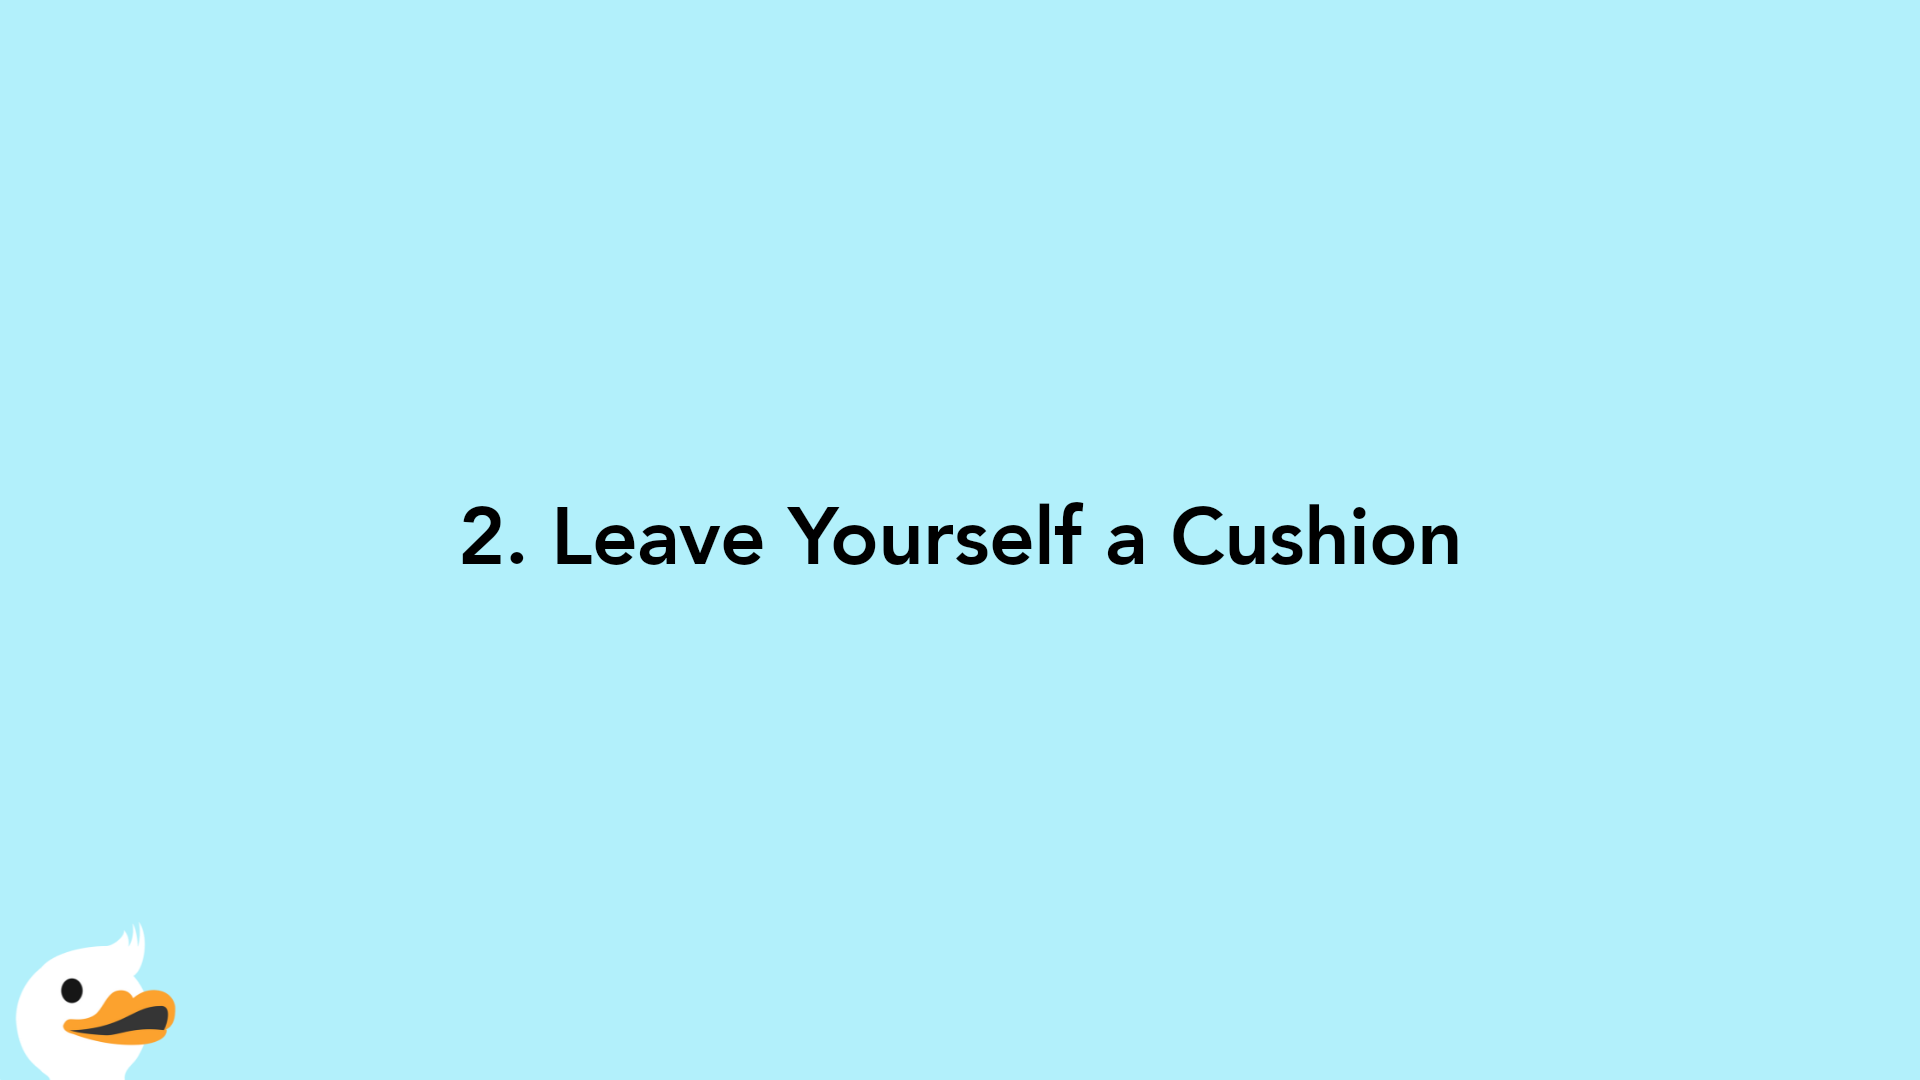 2. Leave Yourself a Cushion